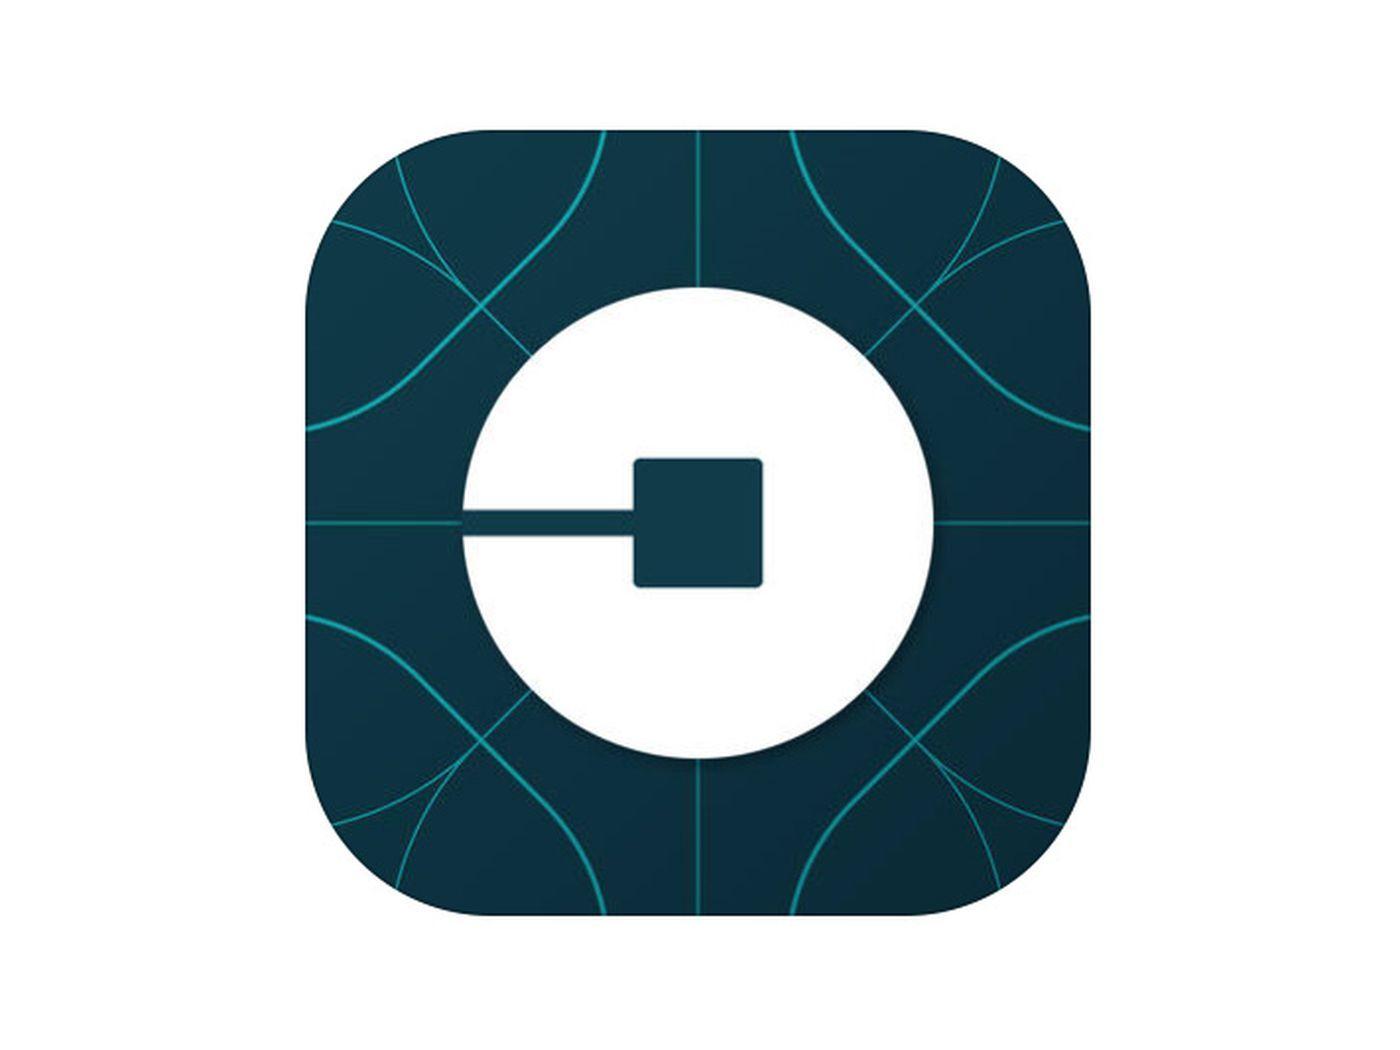 New Printable Uber Logo - Uber just completely changed its logo and branding - The Verge